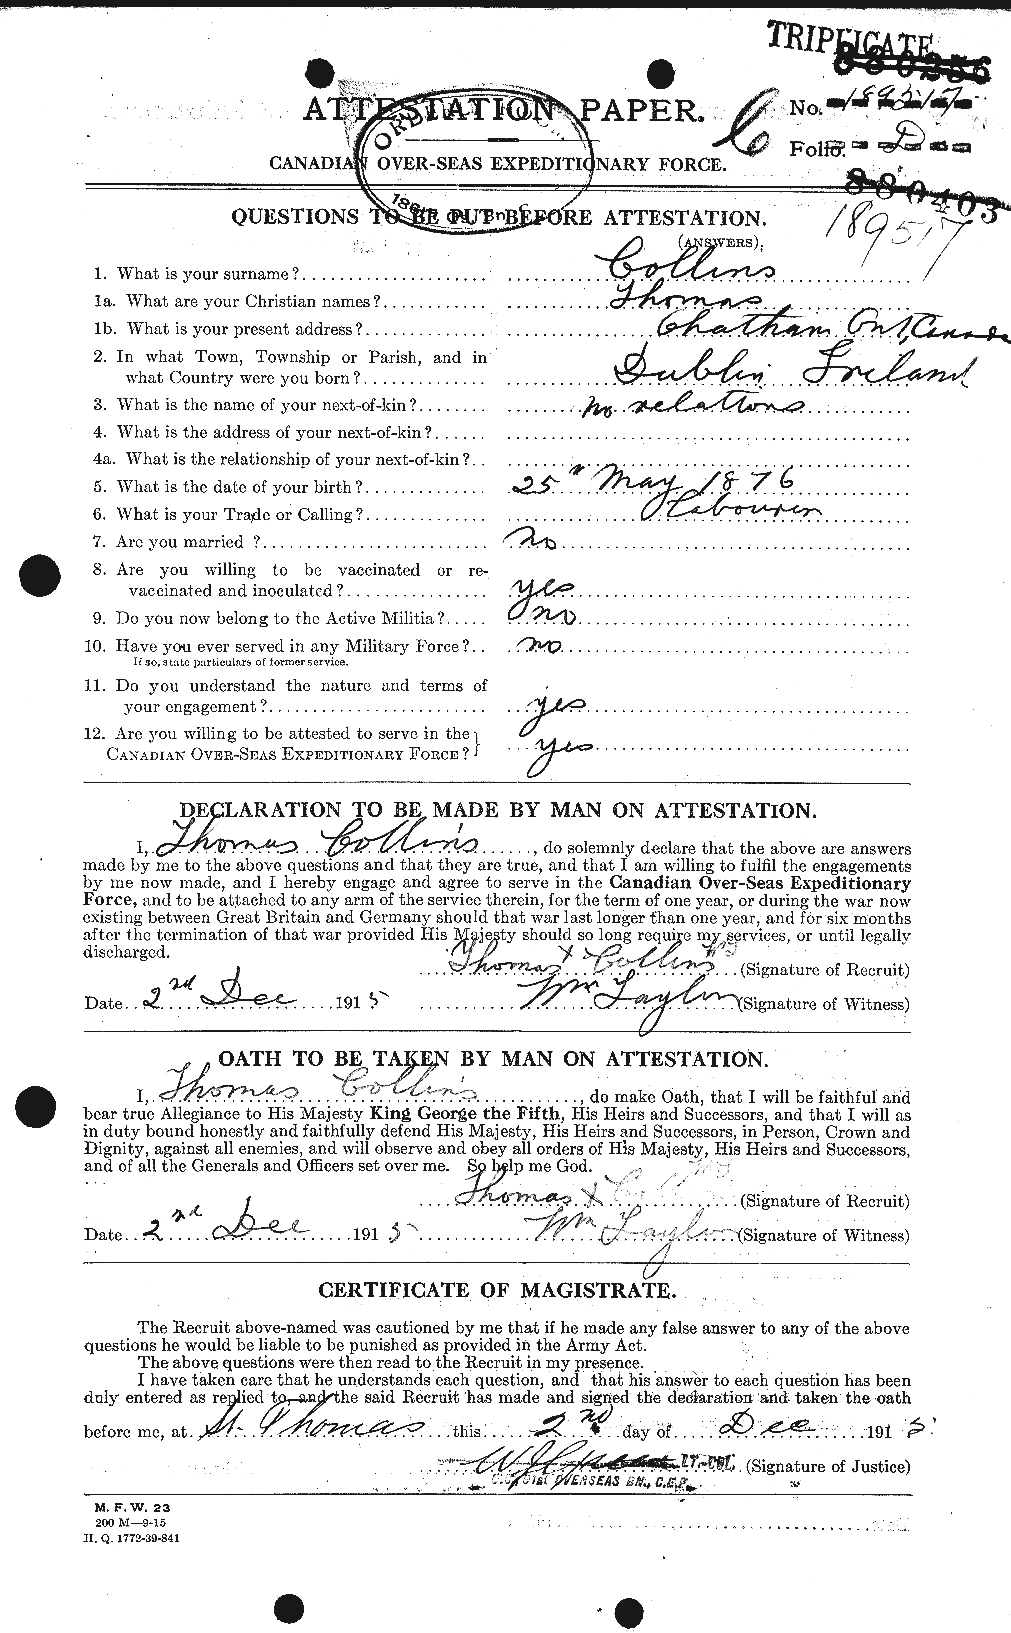 Personnel Records of the First World War - CEF 069137a